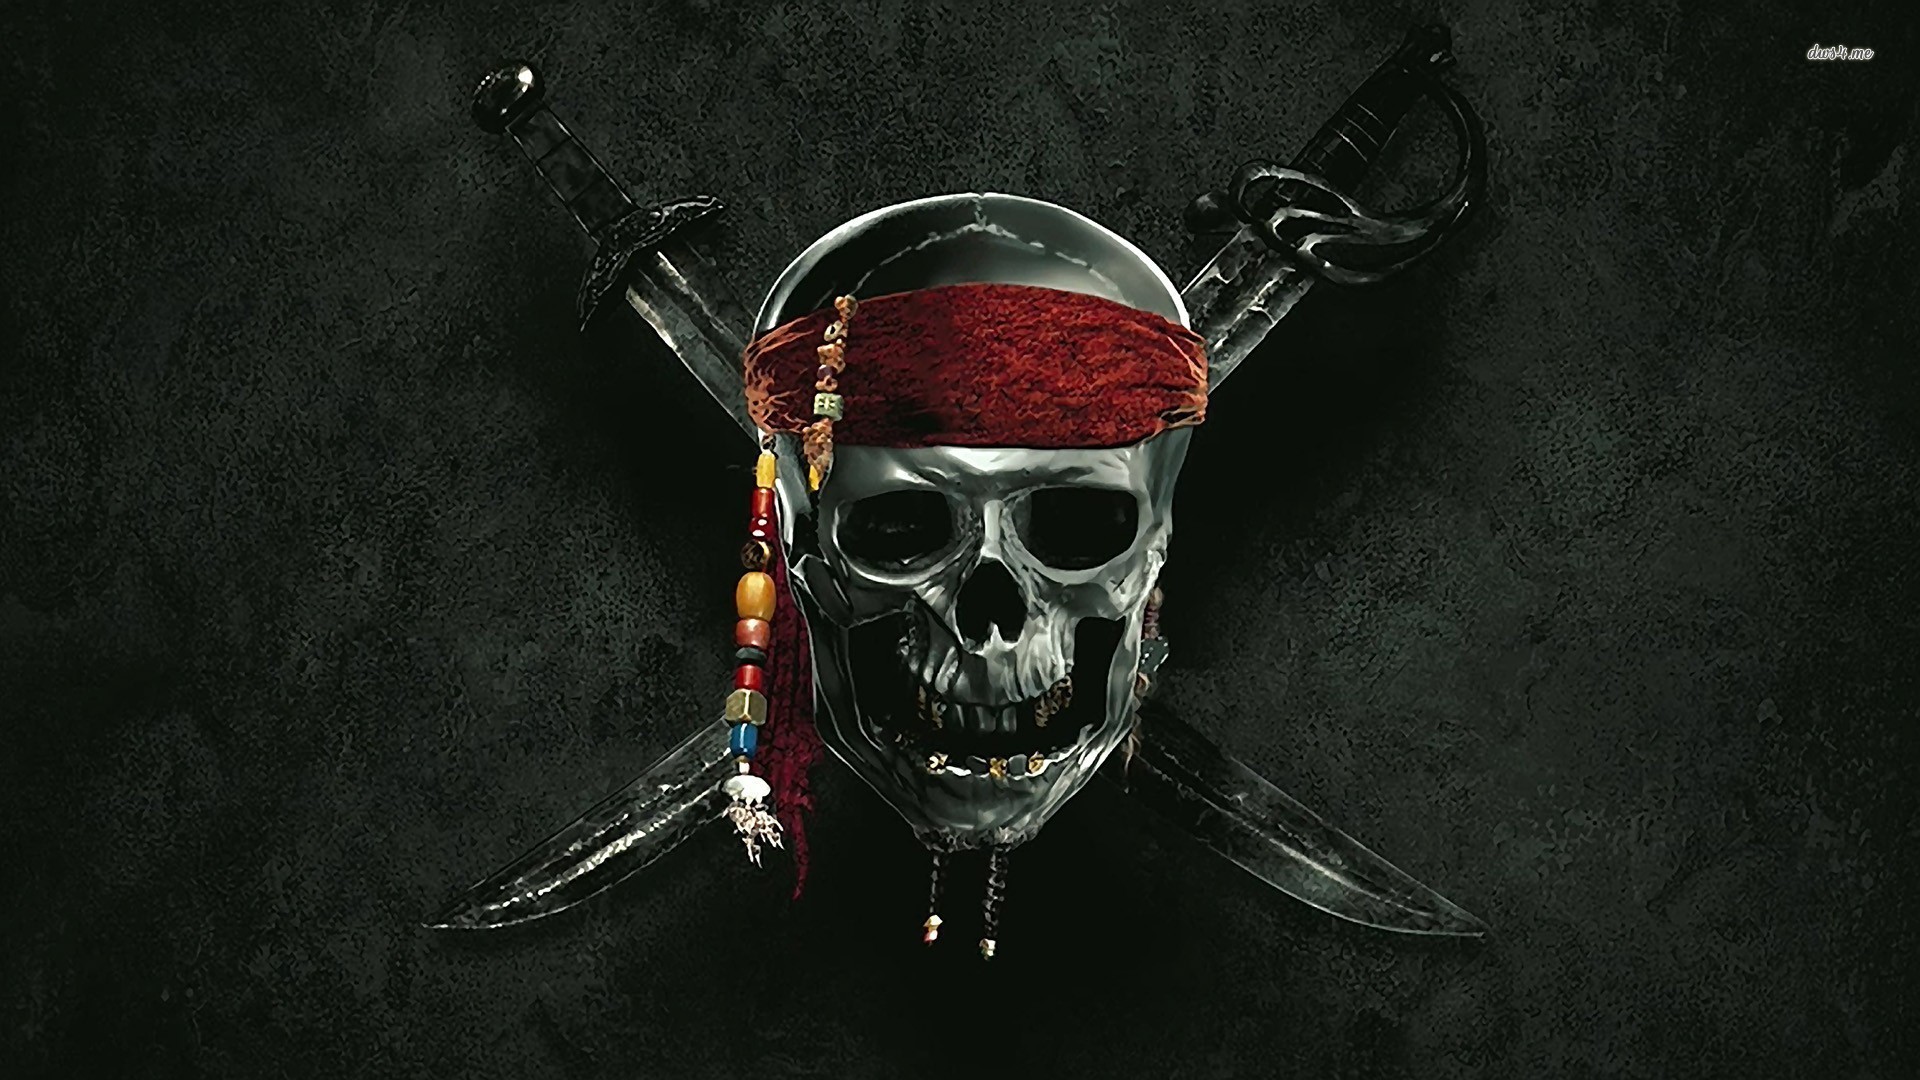 1920x1080 ... Pirates of the Caribbean wallpaper  ...